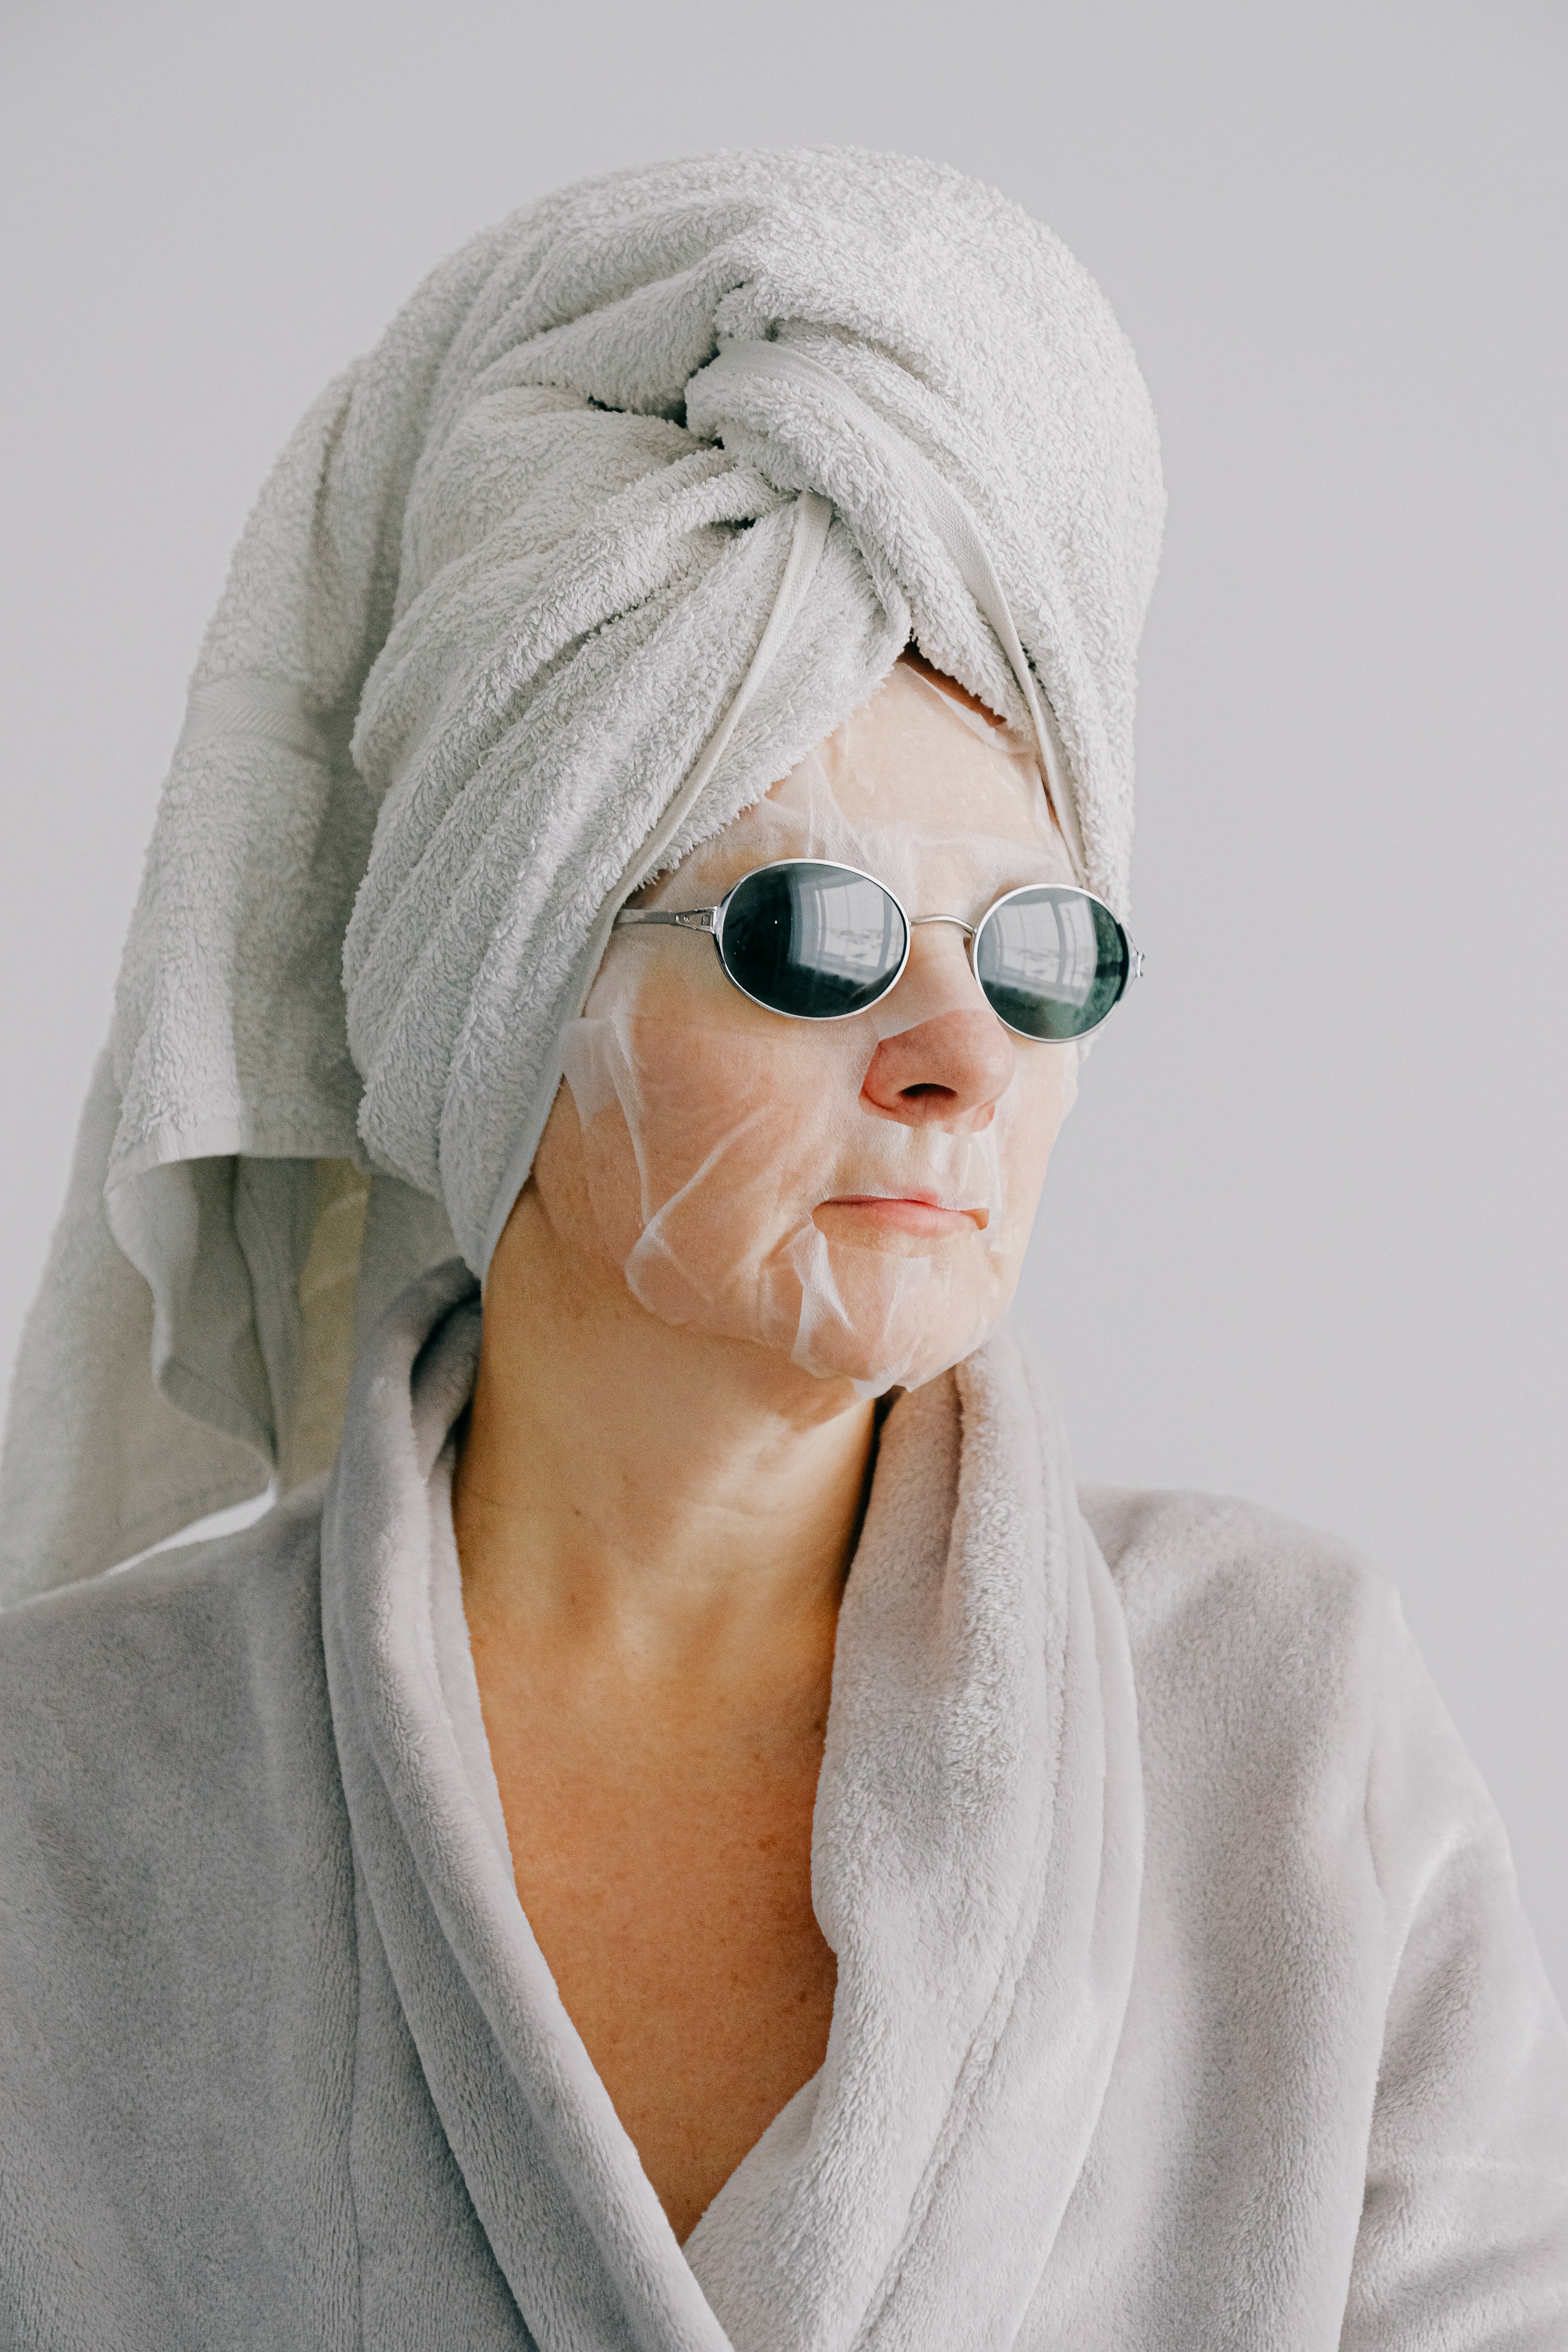 Sandra was doing her morning skincare routine when she spotted something odd. | Source: Pexels